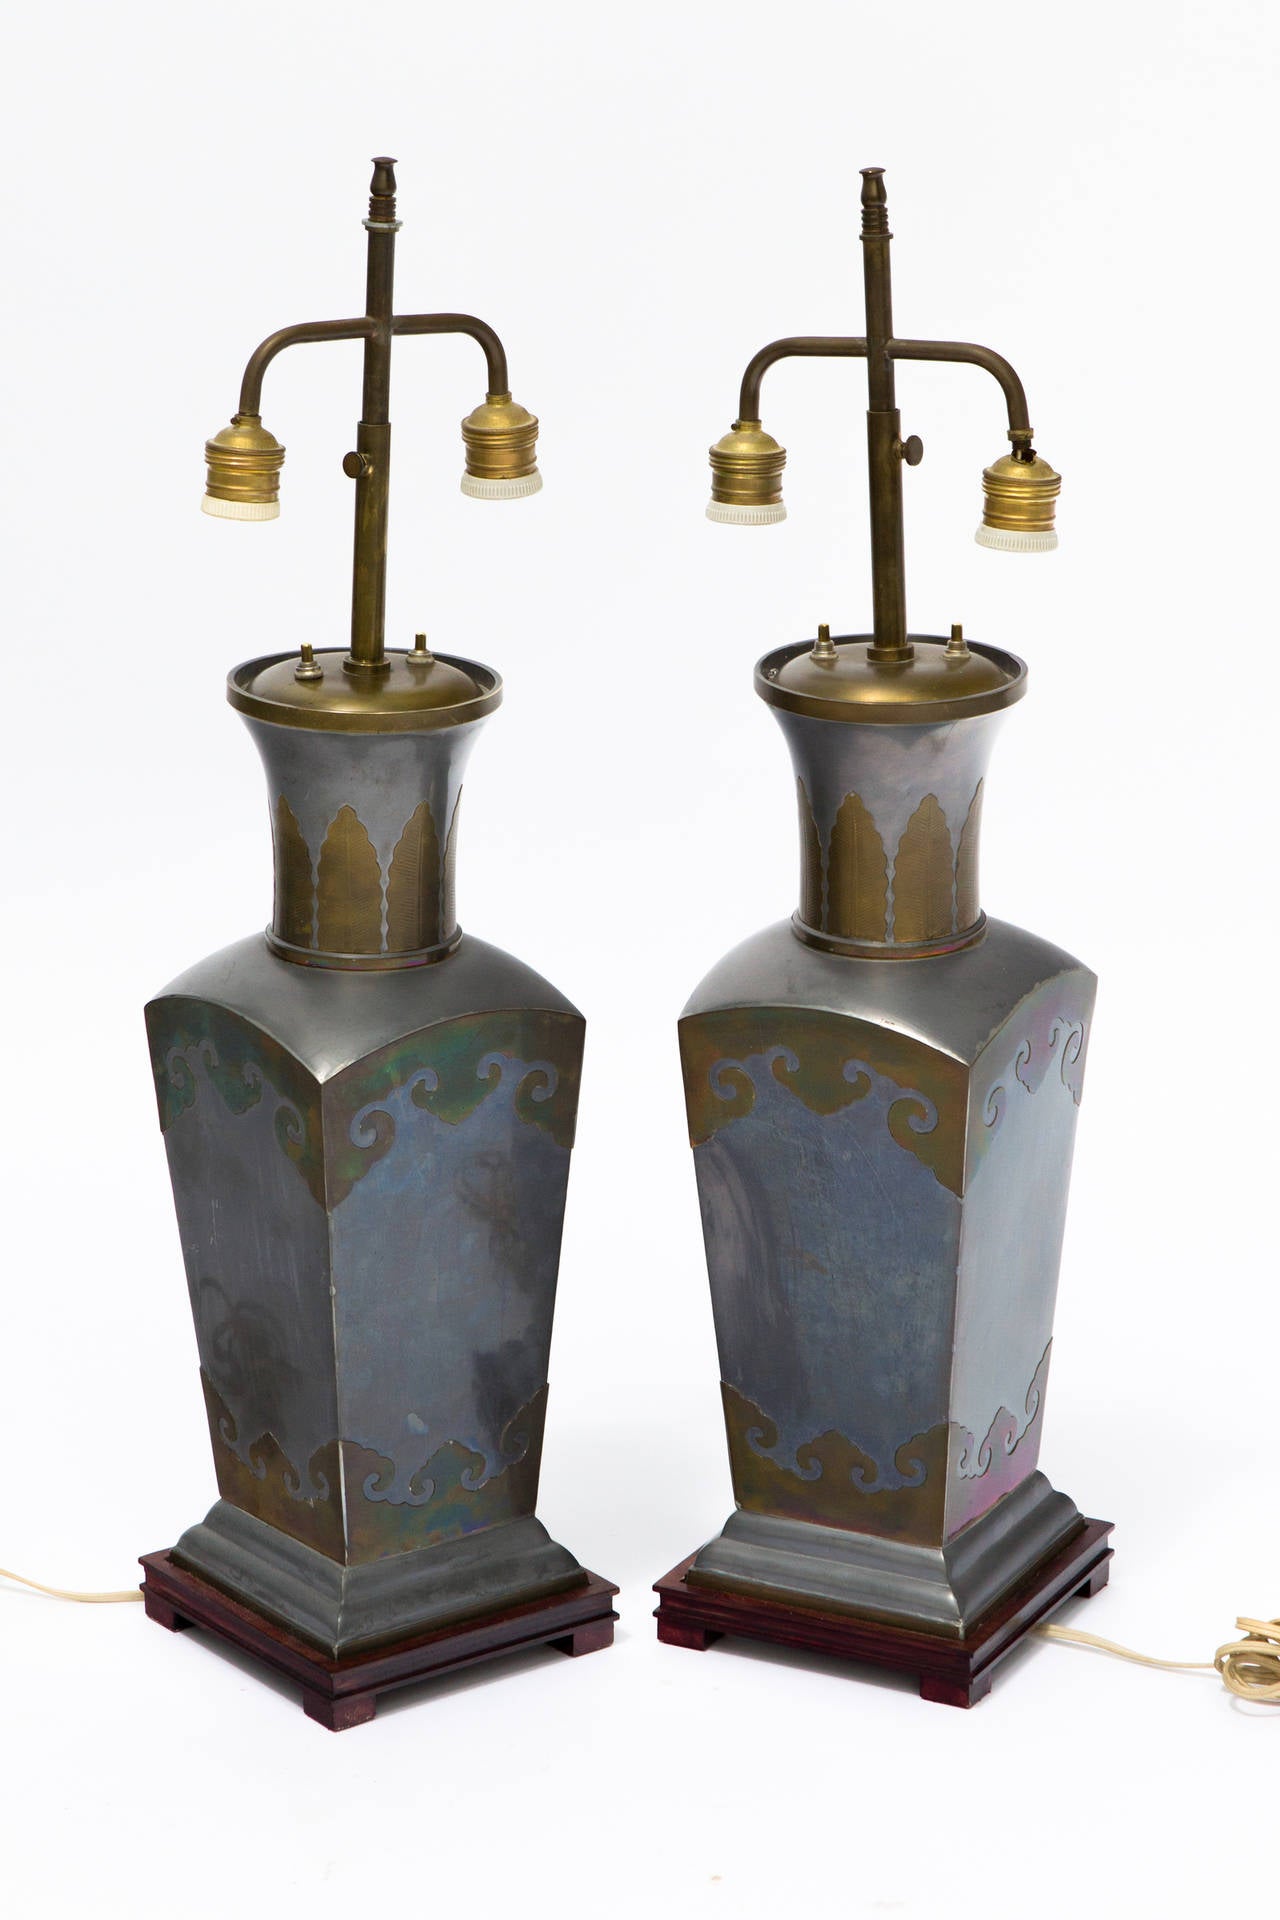 Pair of Asian Pewter and Brass Accented Lamps

Height is measured from the base to the top of the vase.